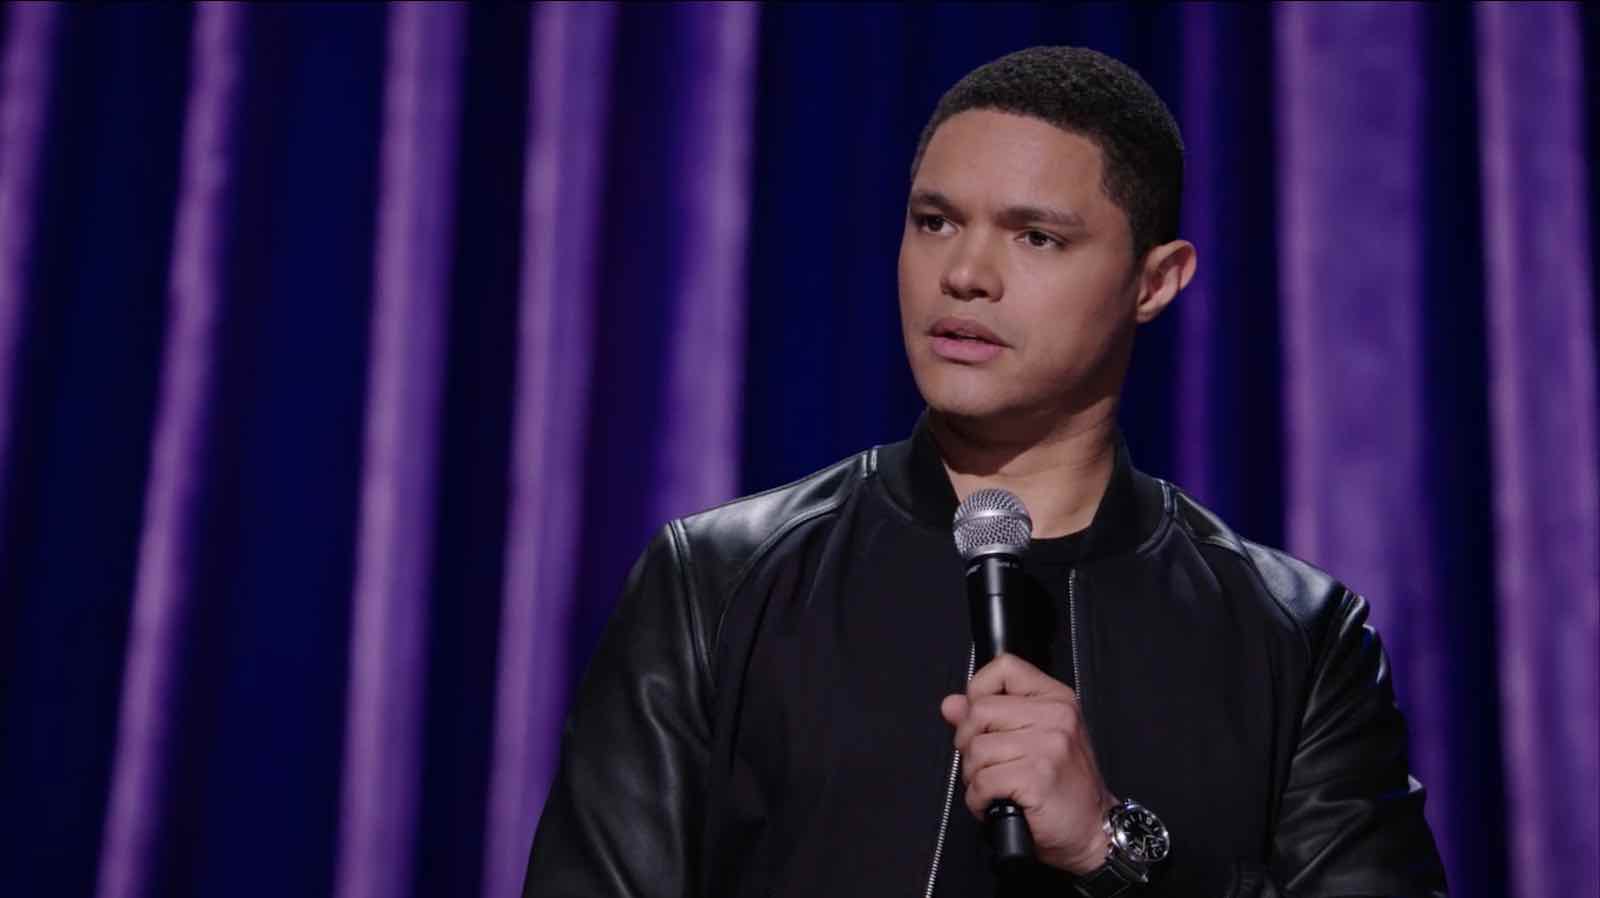 Will the host of the Grammys go nude for real this time? Let's take a look at Trevor Noah's plan for the next viral awards show.